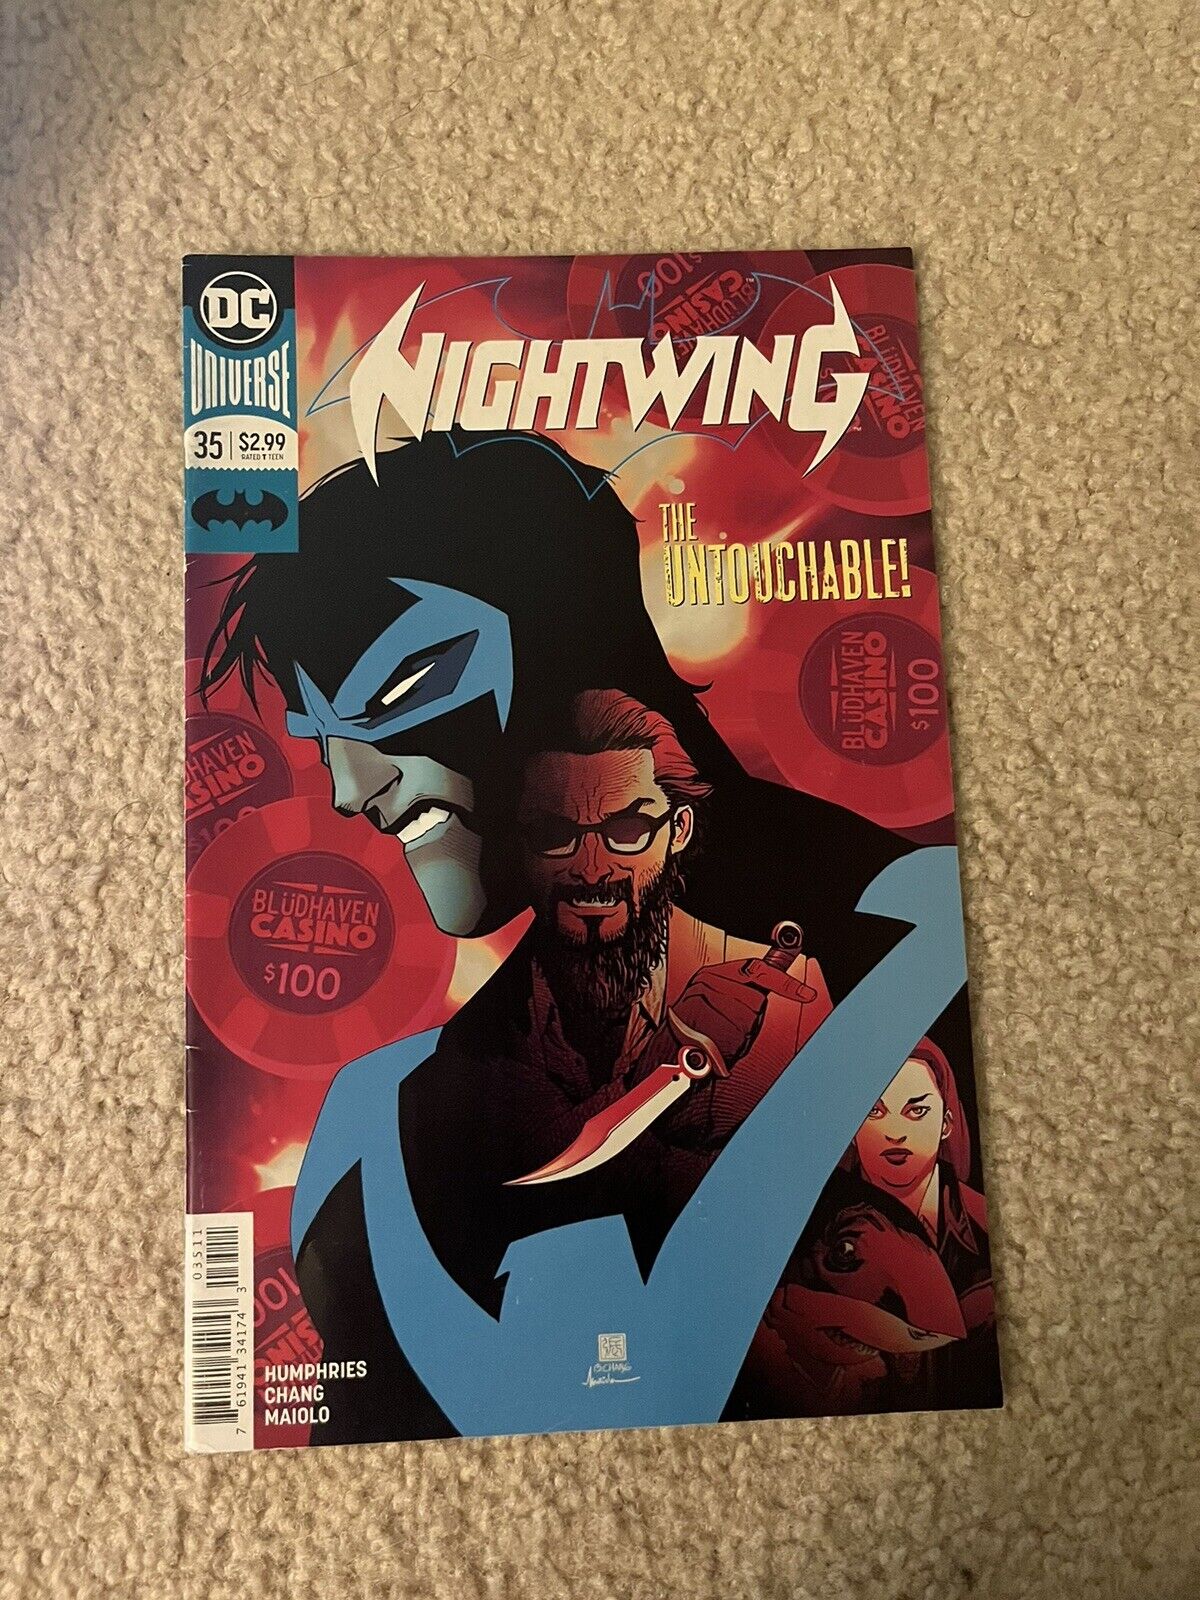 Nightwing: The Uutouchable (2018) #35 